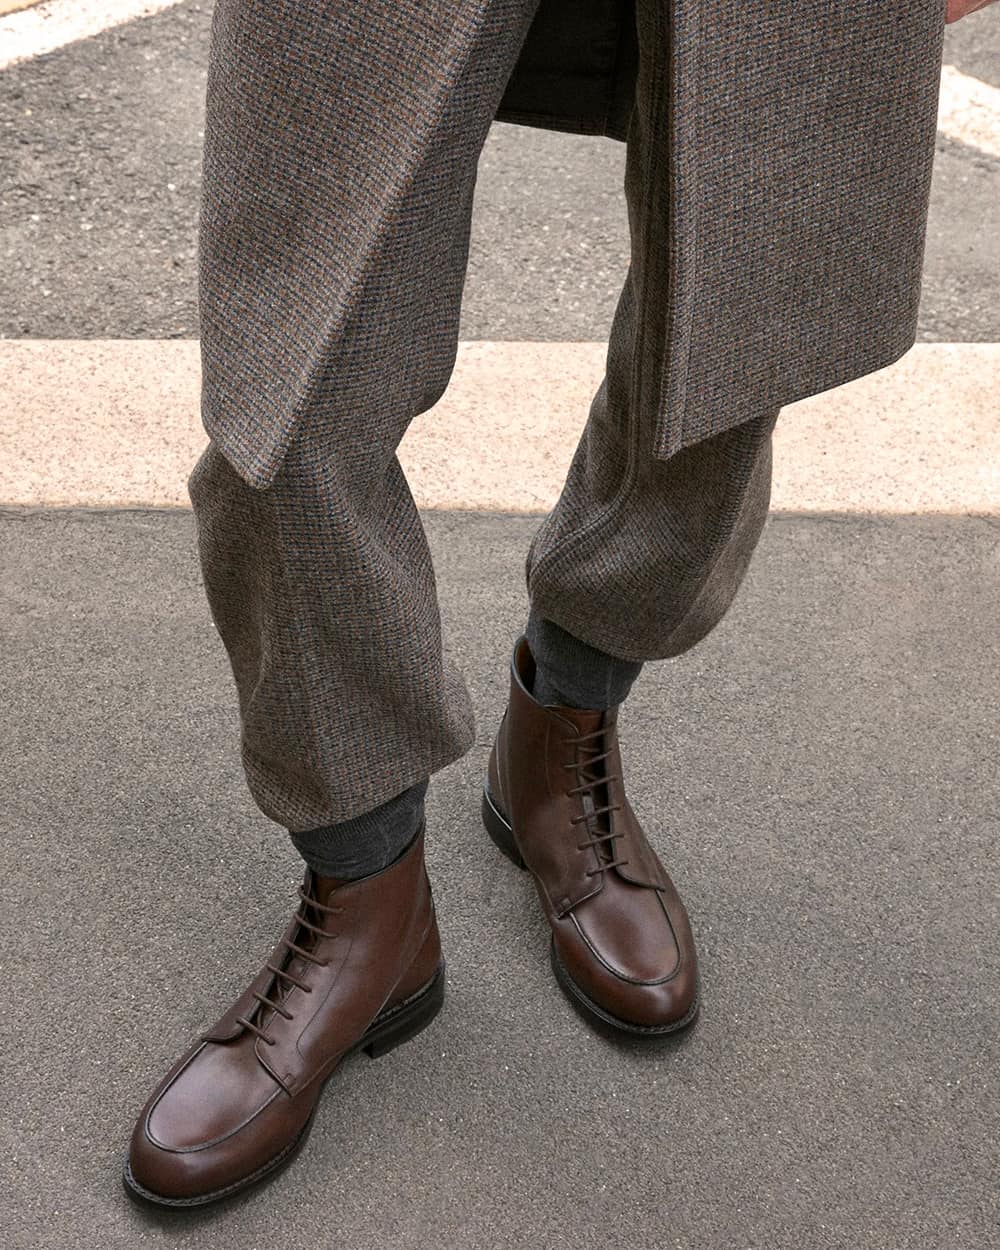 A pair of men's Church's brown leather Derby boots worn on feet with charcoal socks and brown tweed pants